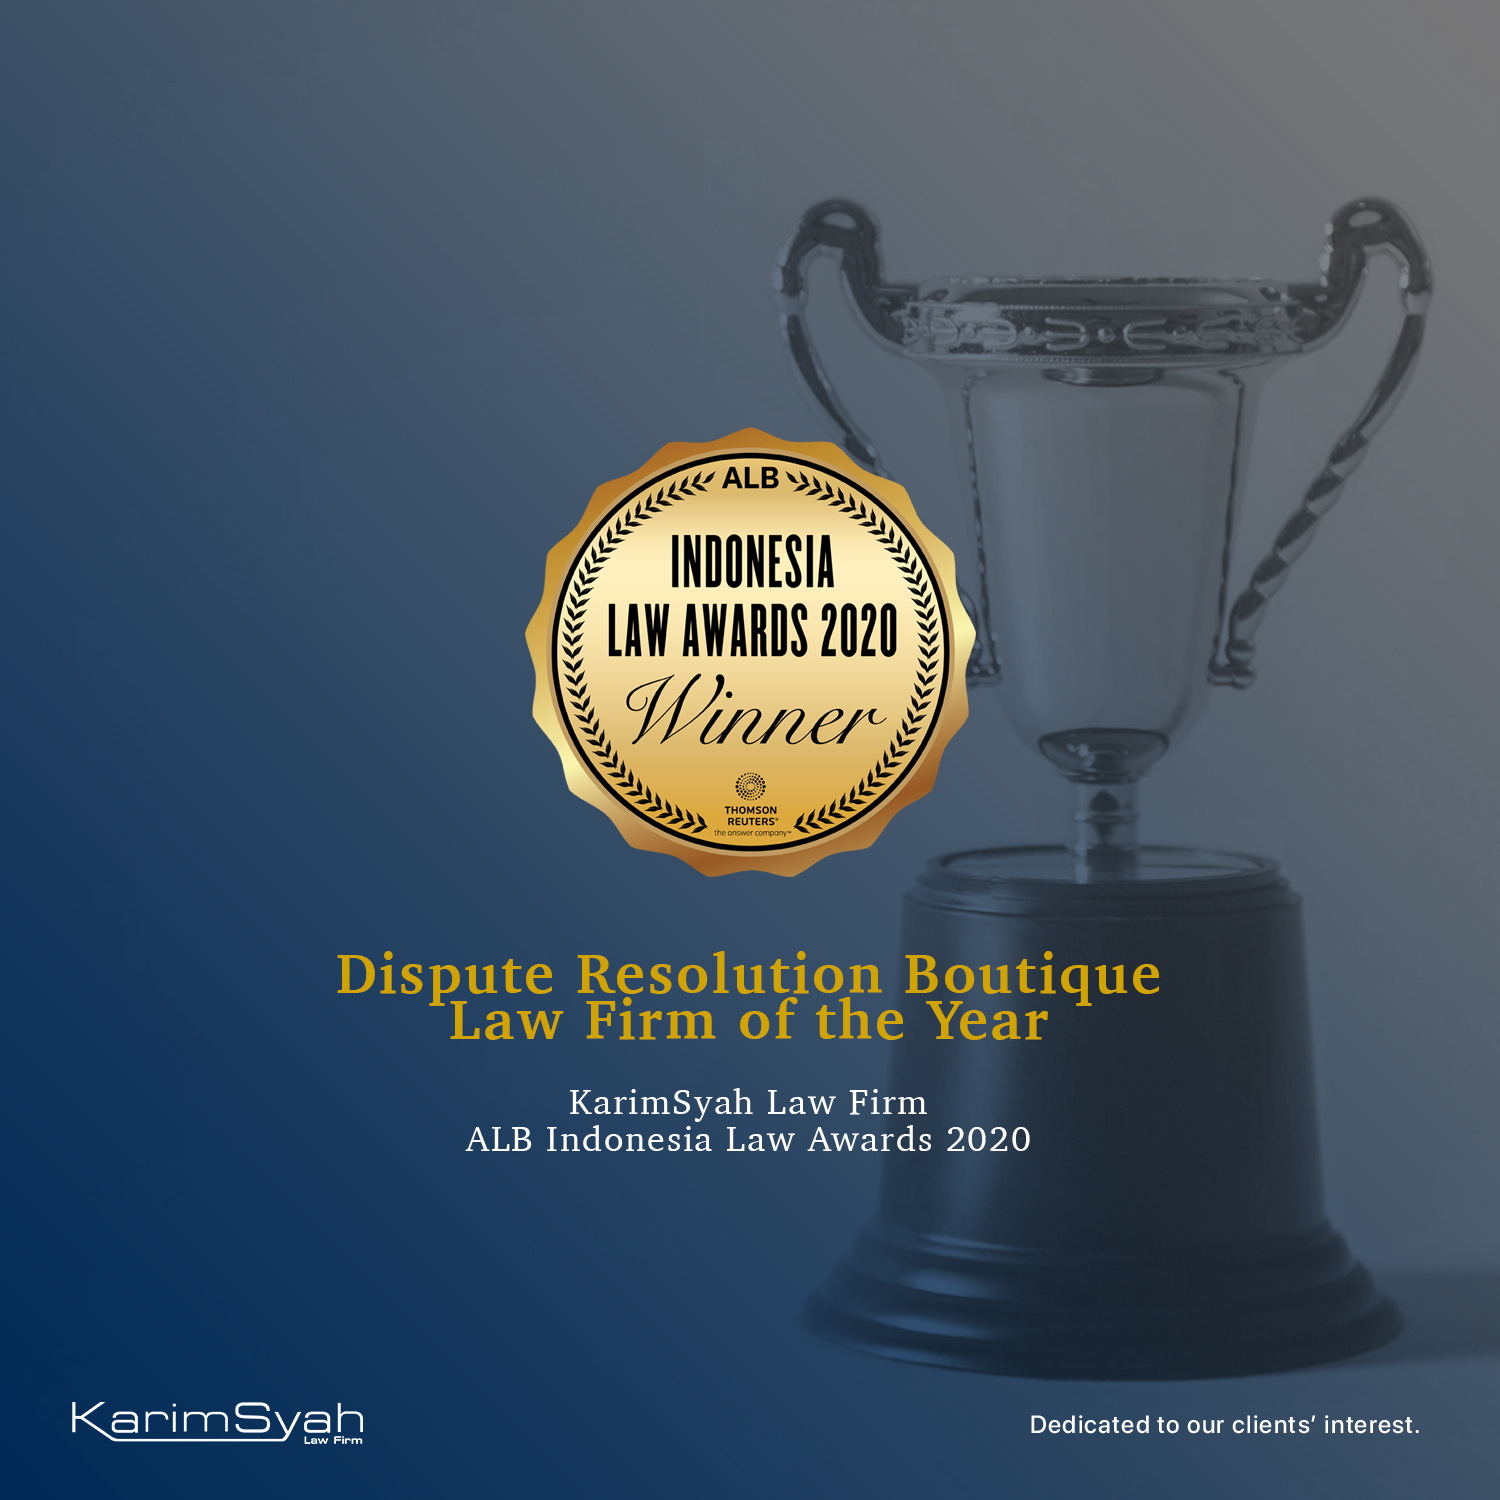 KarimSyah wins Dispute Resolution Boutique Law Firm of the Year